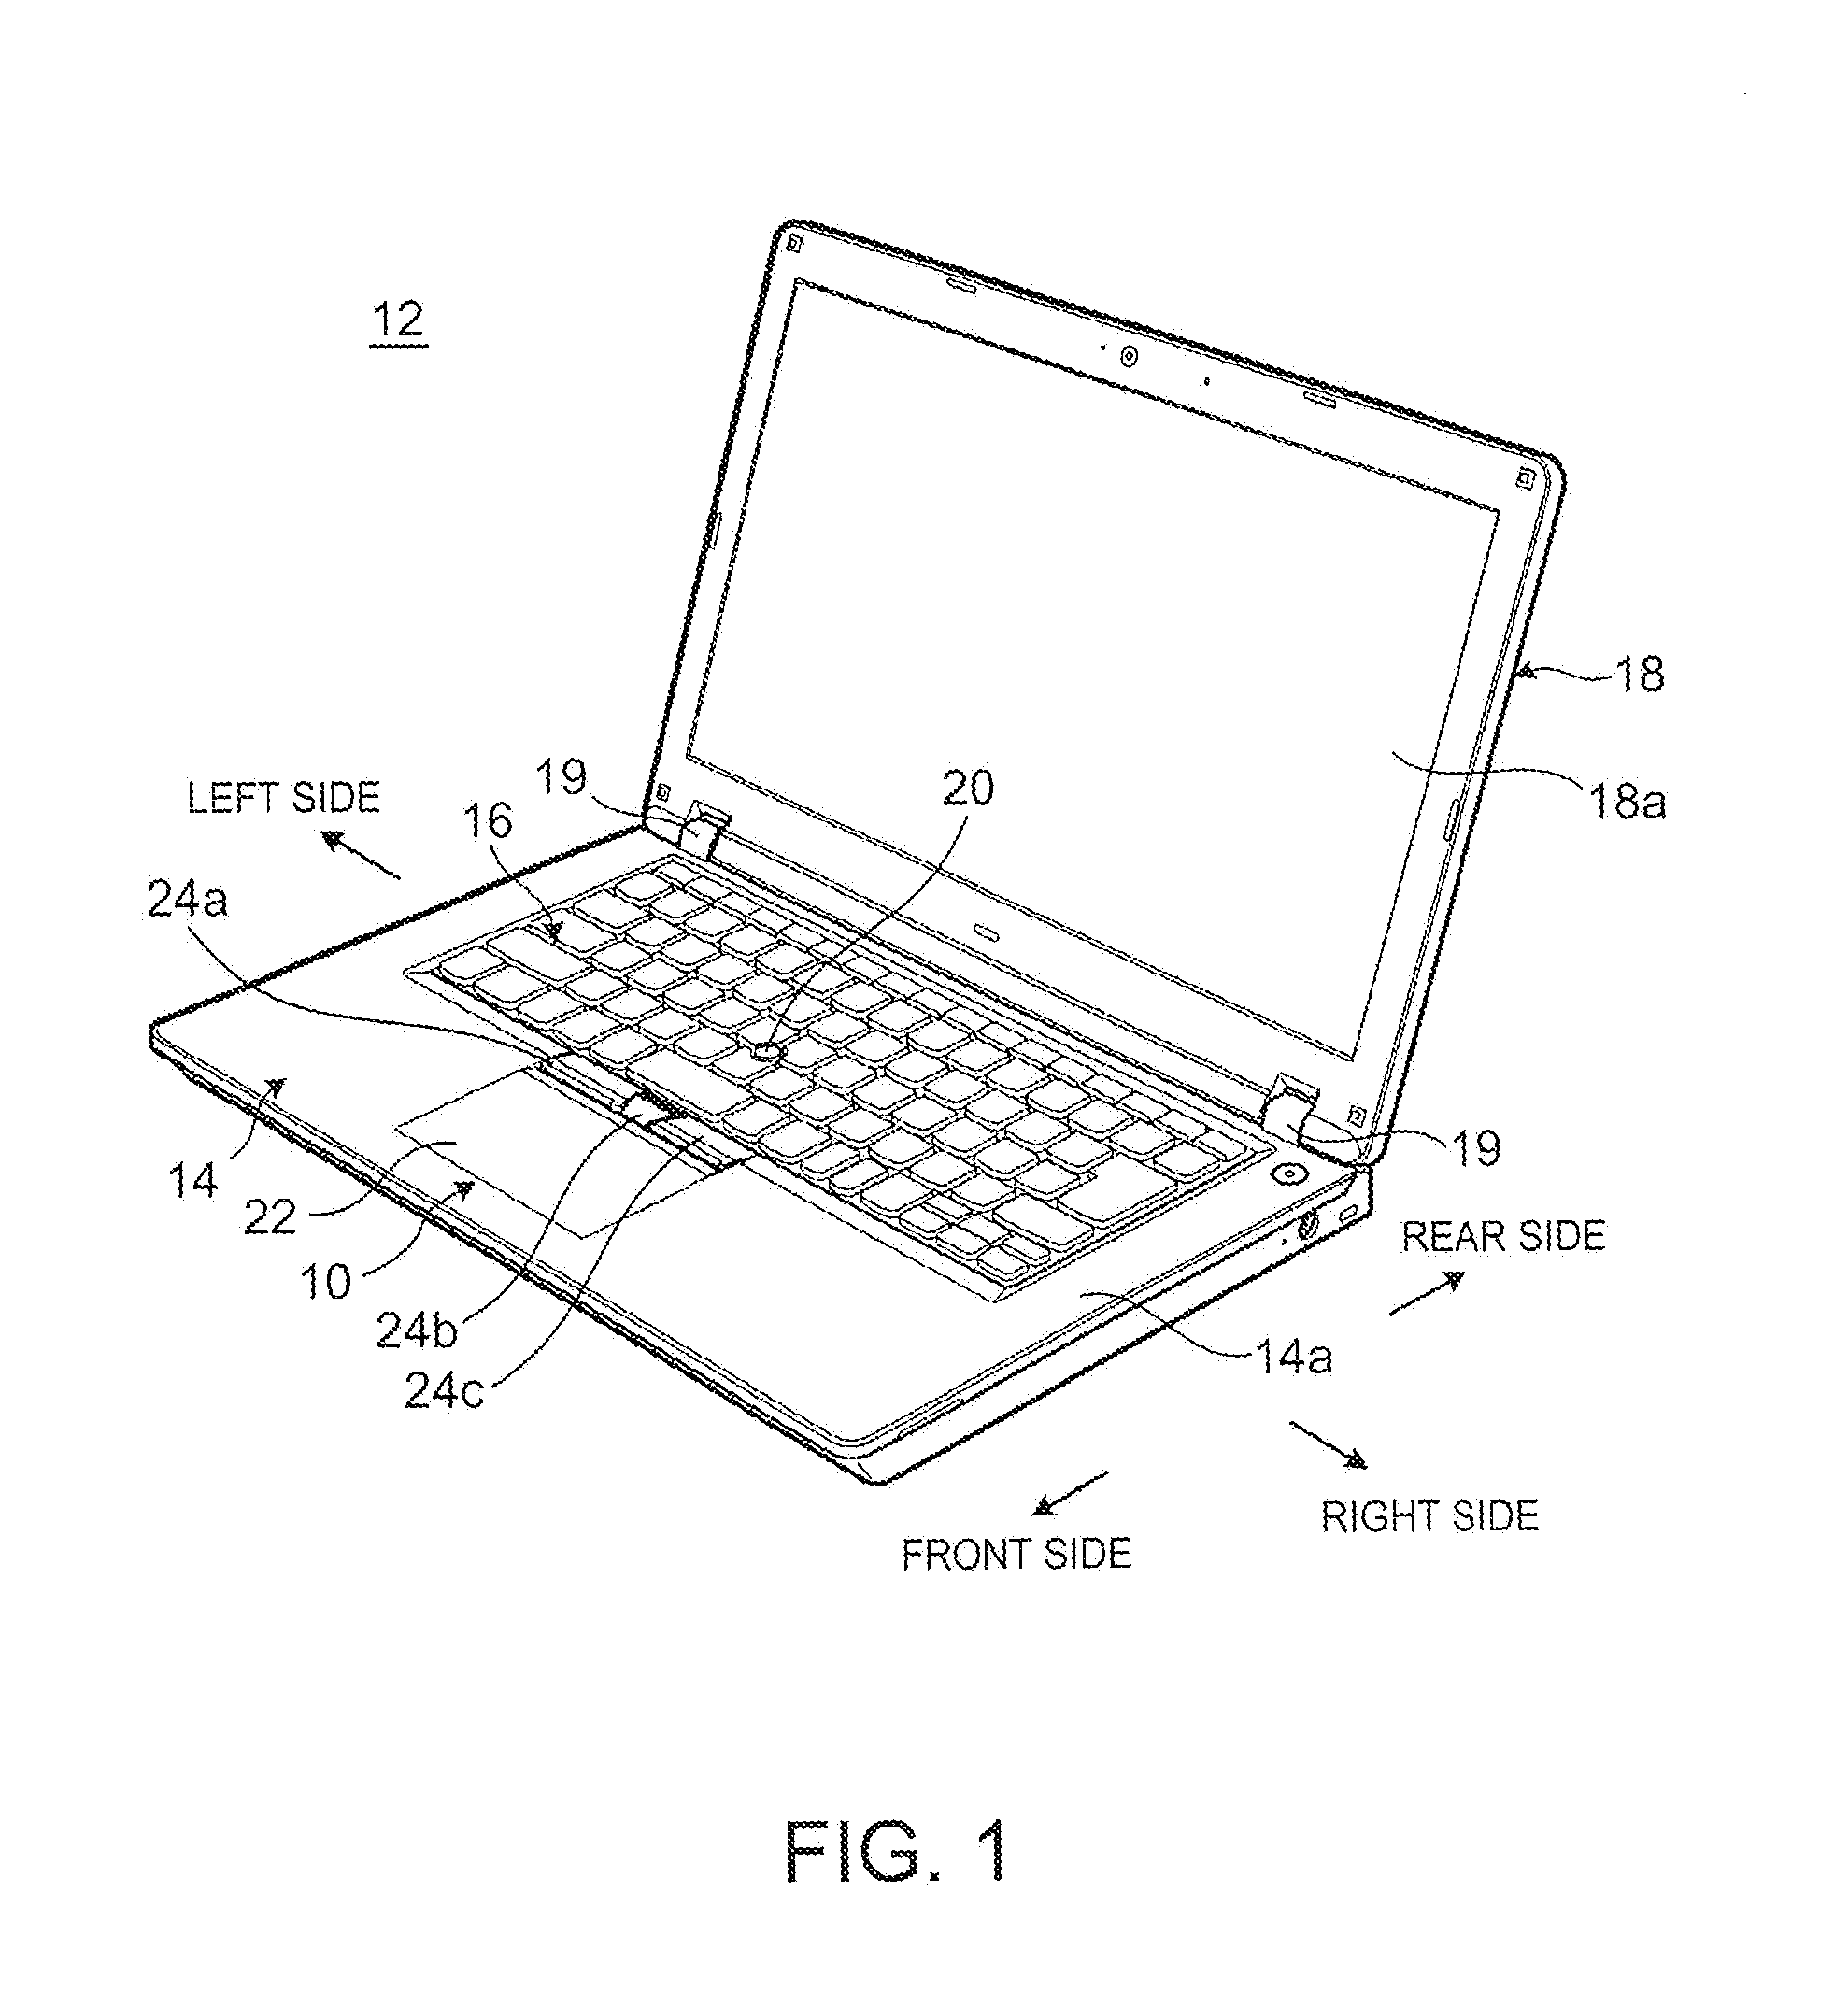 Coupling structure for input devices